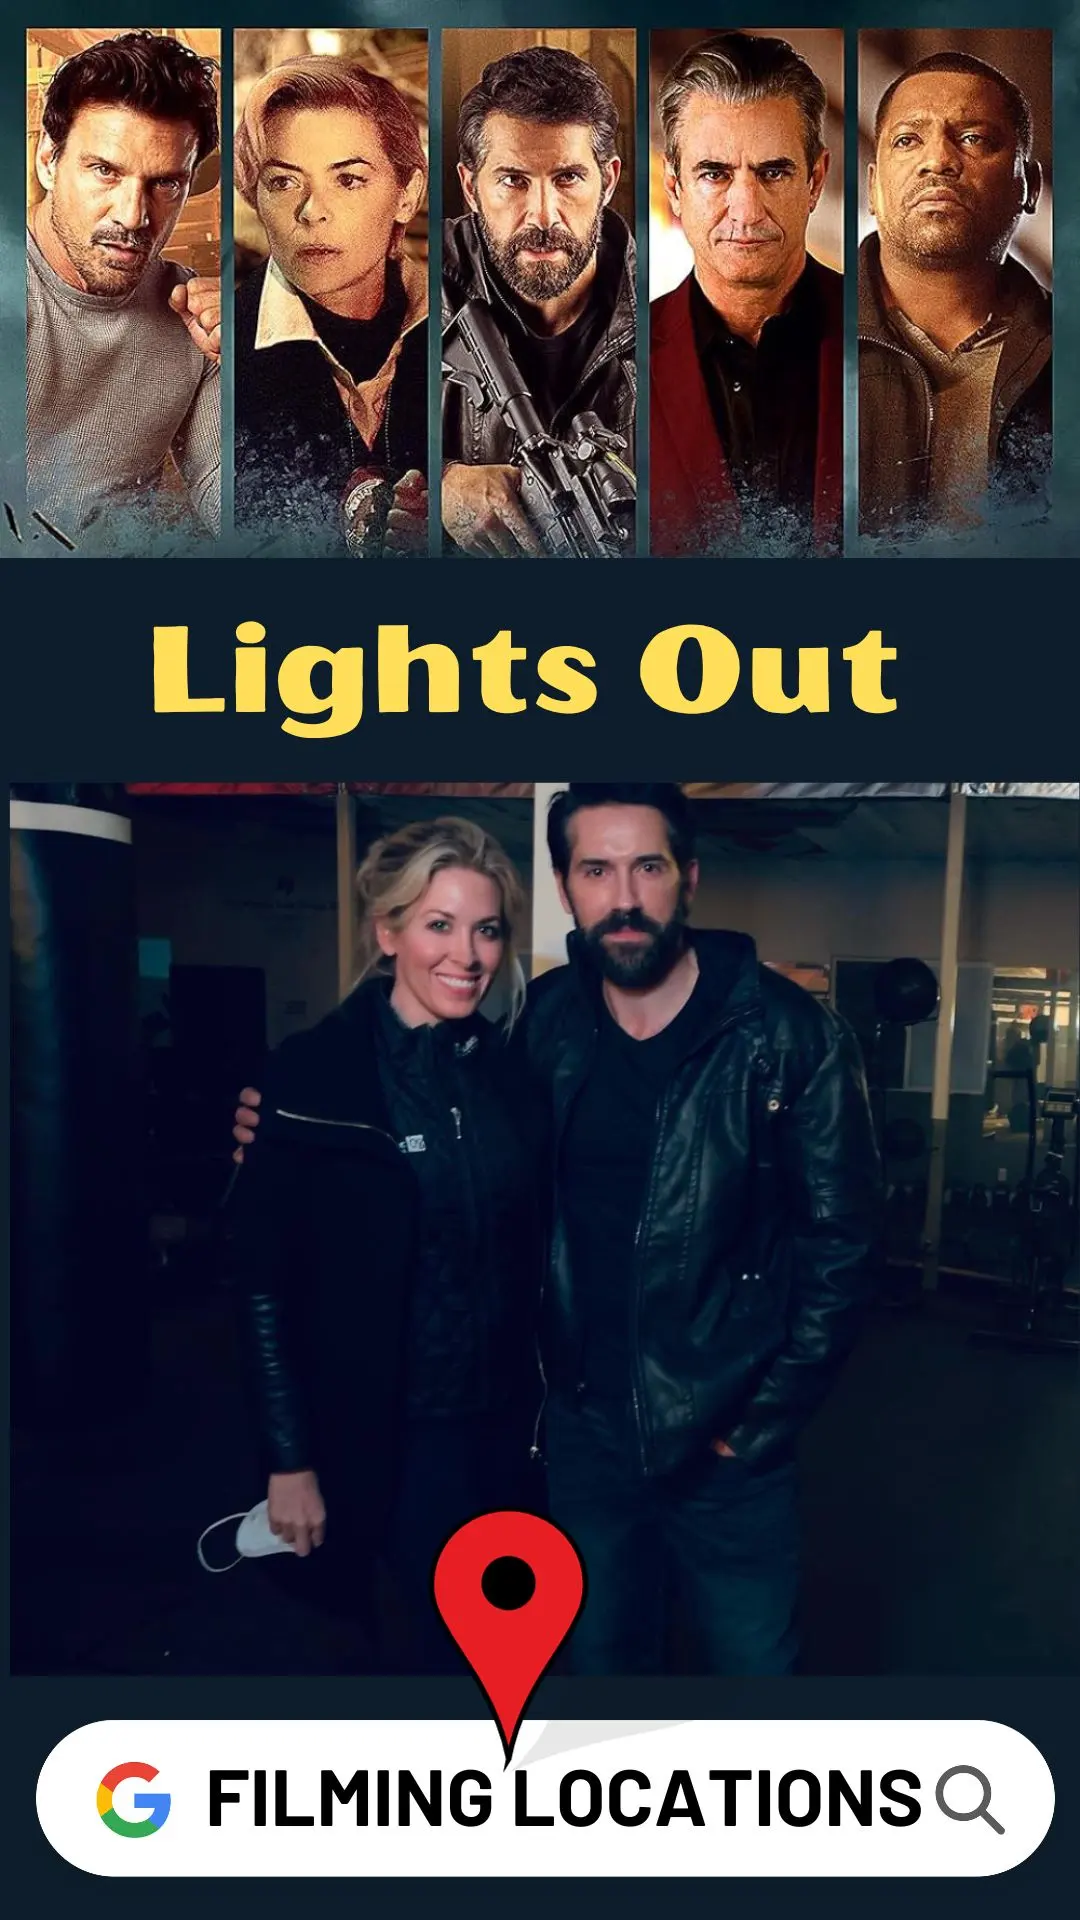 Lights Out Filming Location